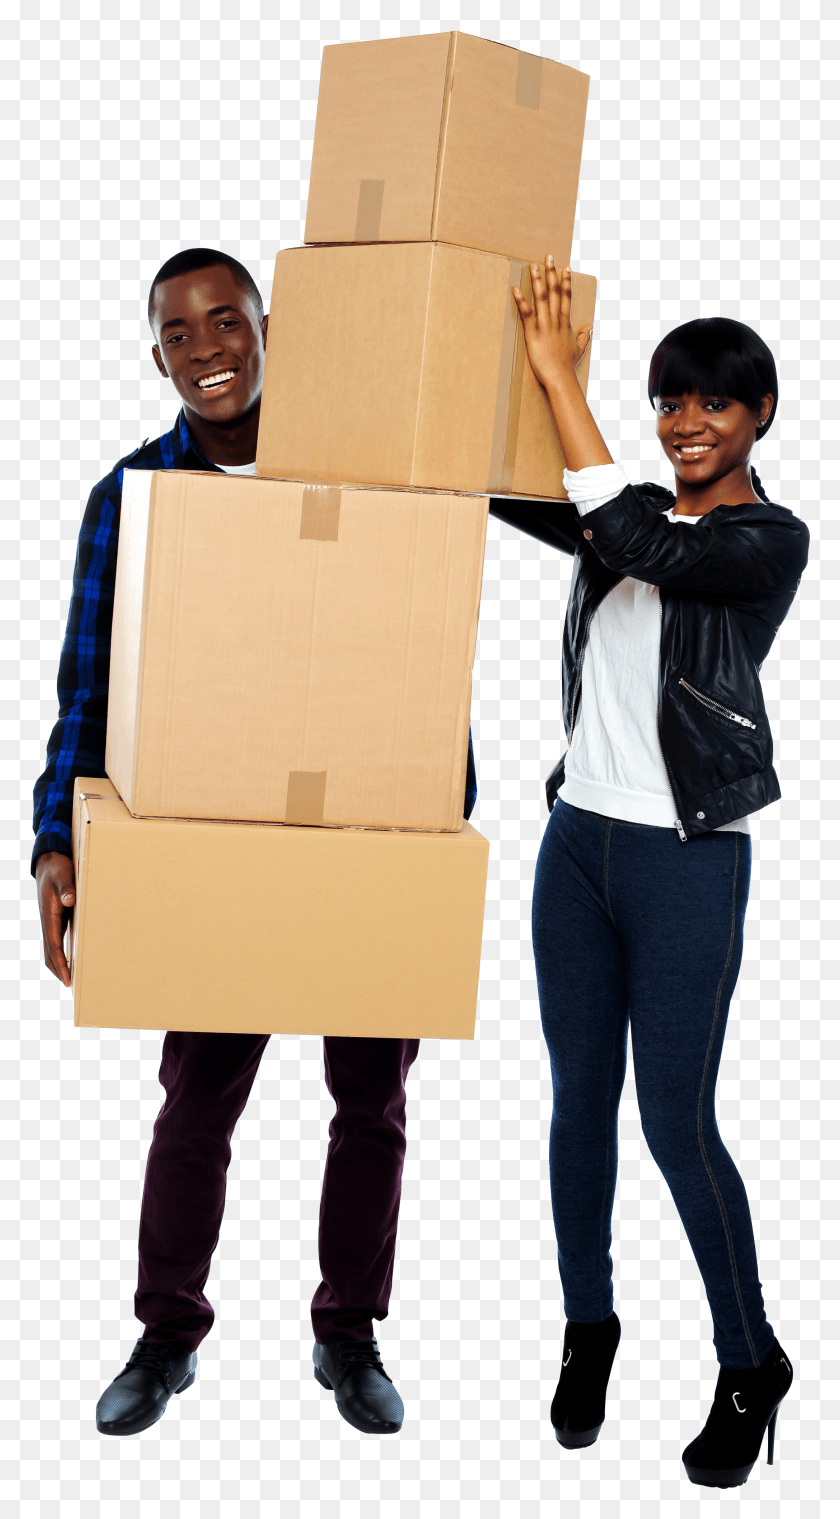 2173x4067 Packing Free Commercial Use Image People With Boxes Descargar Hd Png